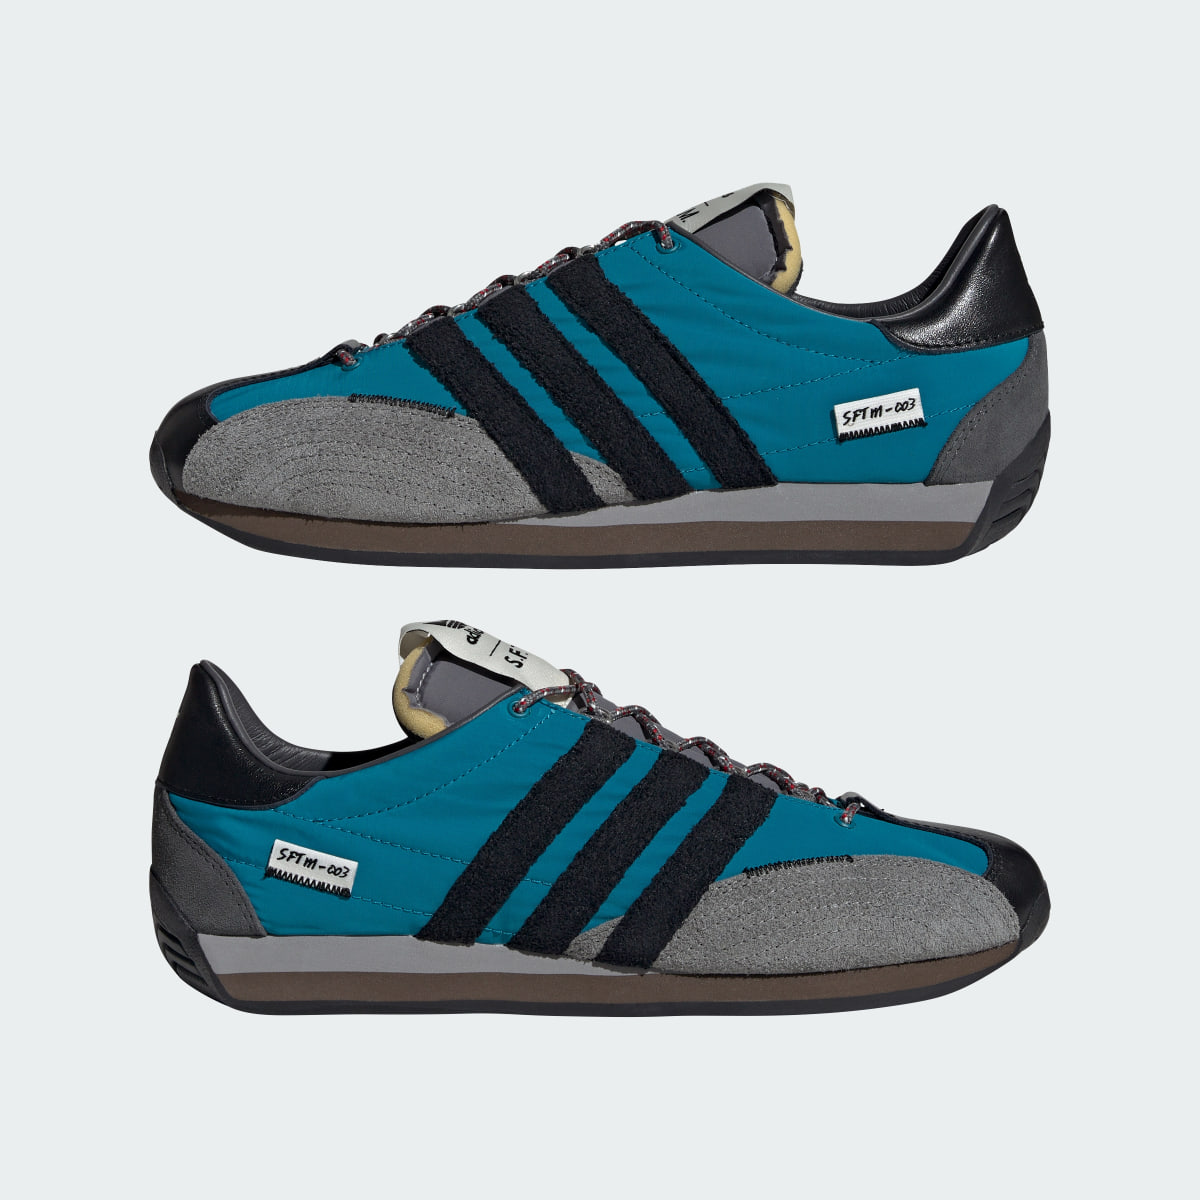 Adidas Country OG Low Trainers. 9